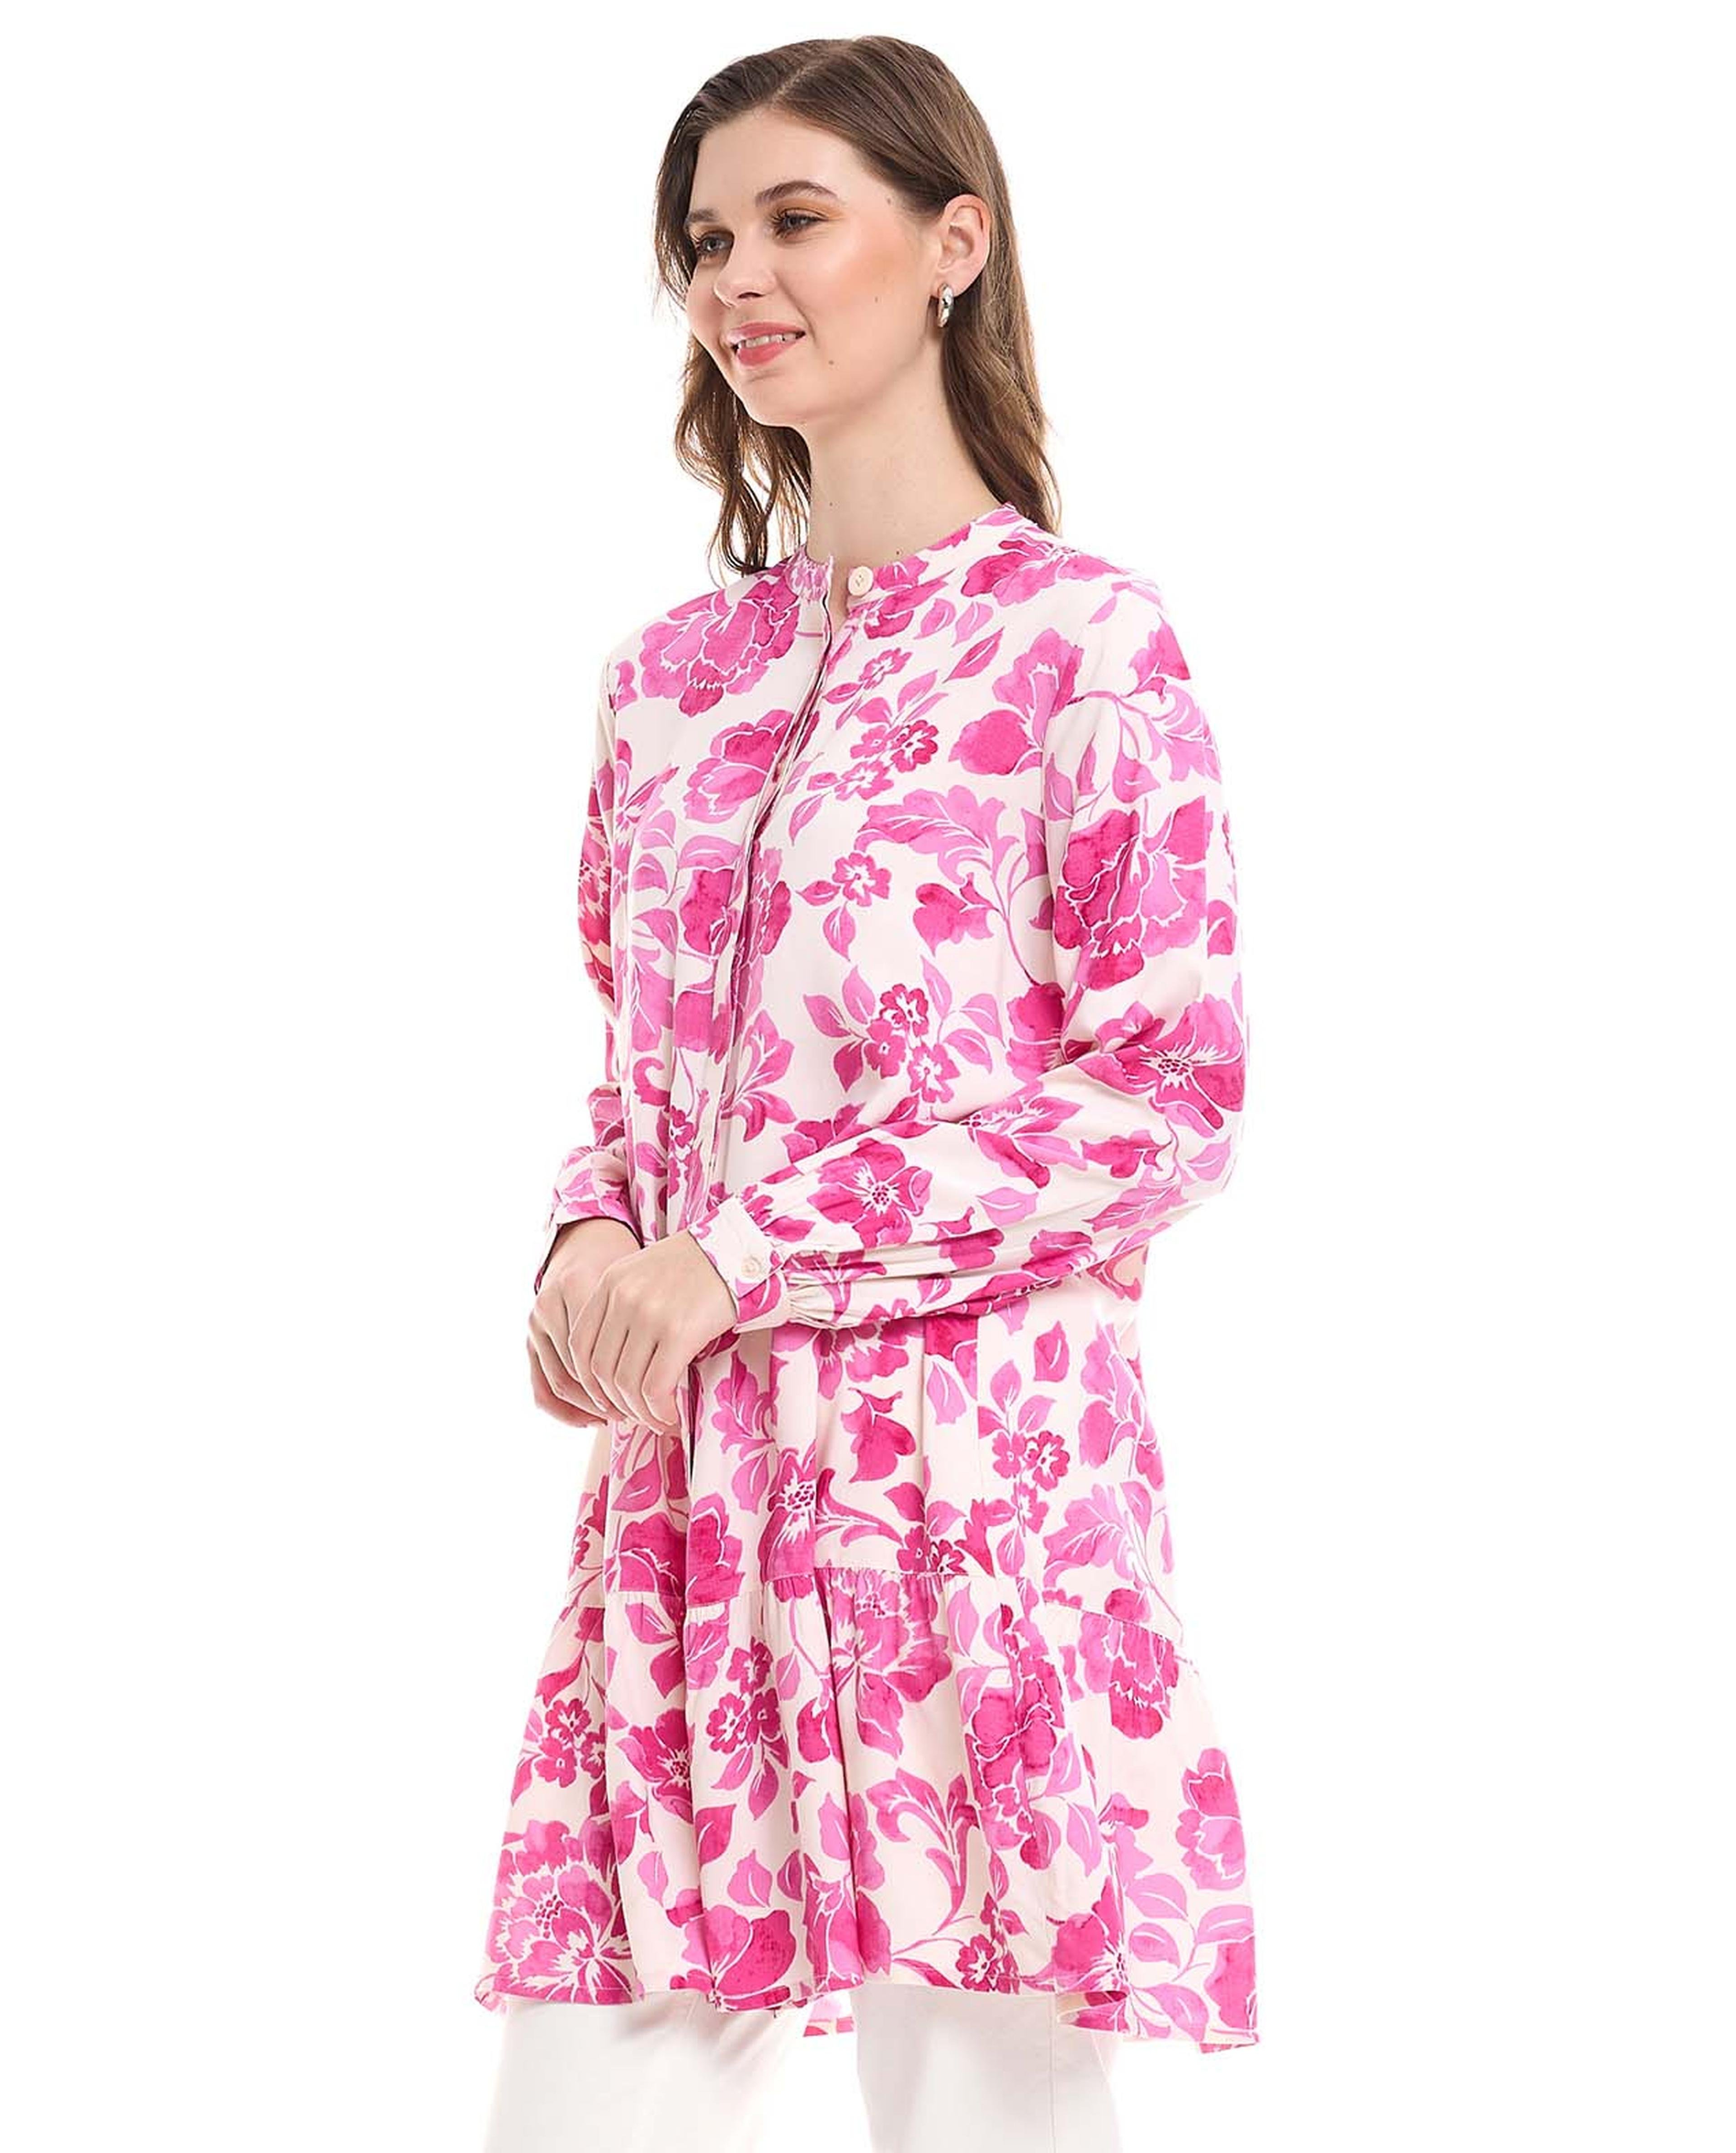 Floral Print Tunic with Stand Collar and Long Sleeves